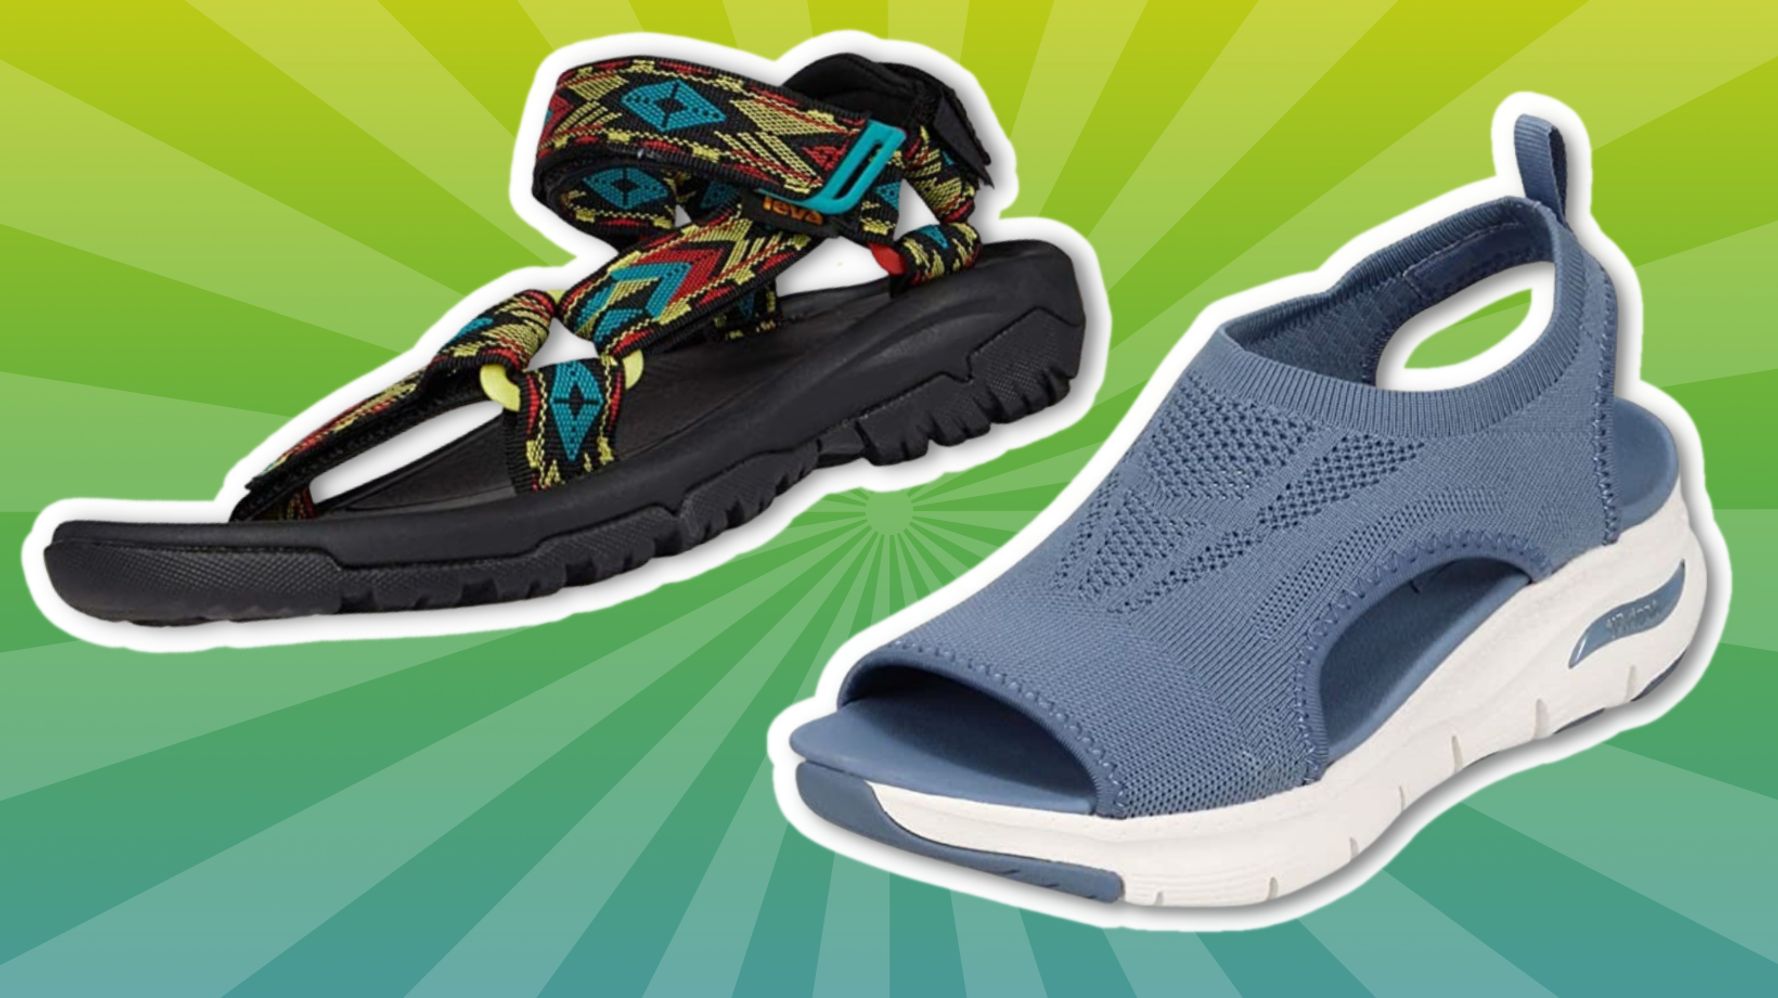 The Best Sandals For Plantar Fasciitis, According To A Podiatrist